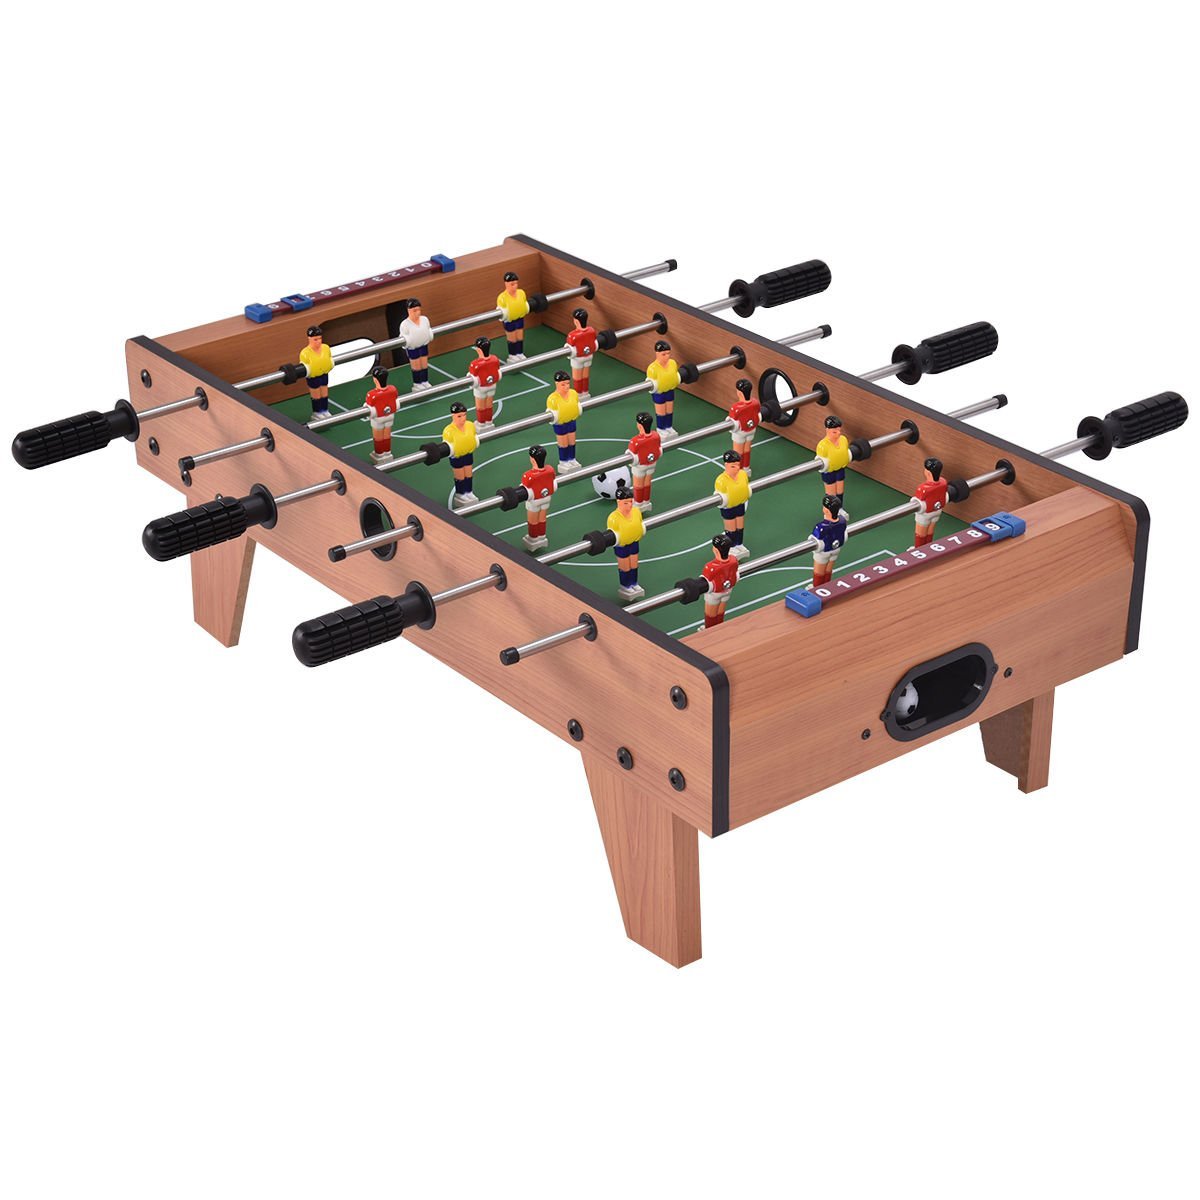 giantex foosball soccer competition tabletop set game image